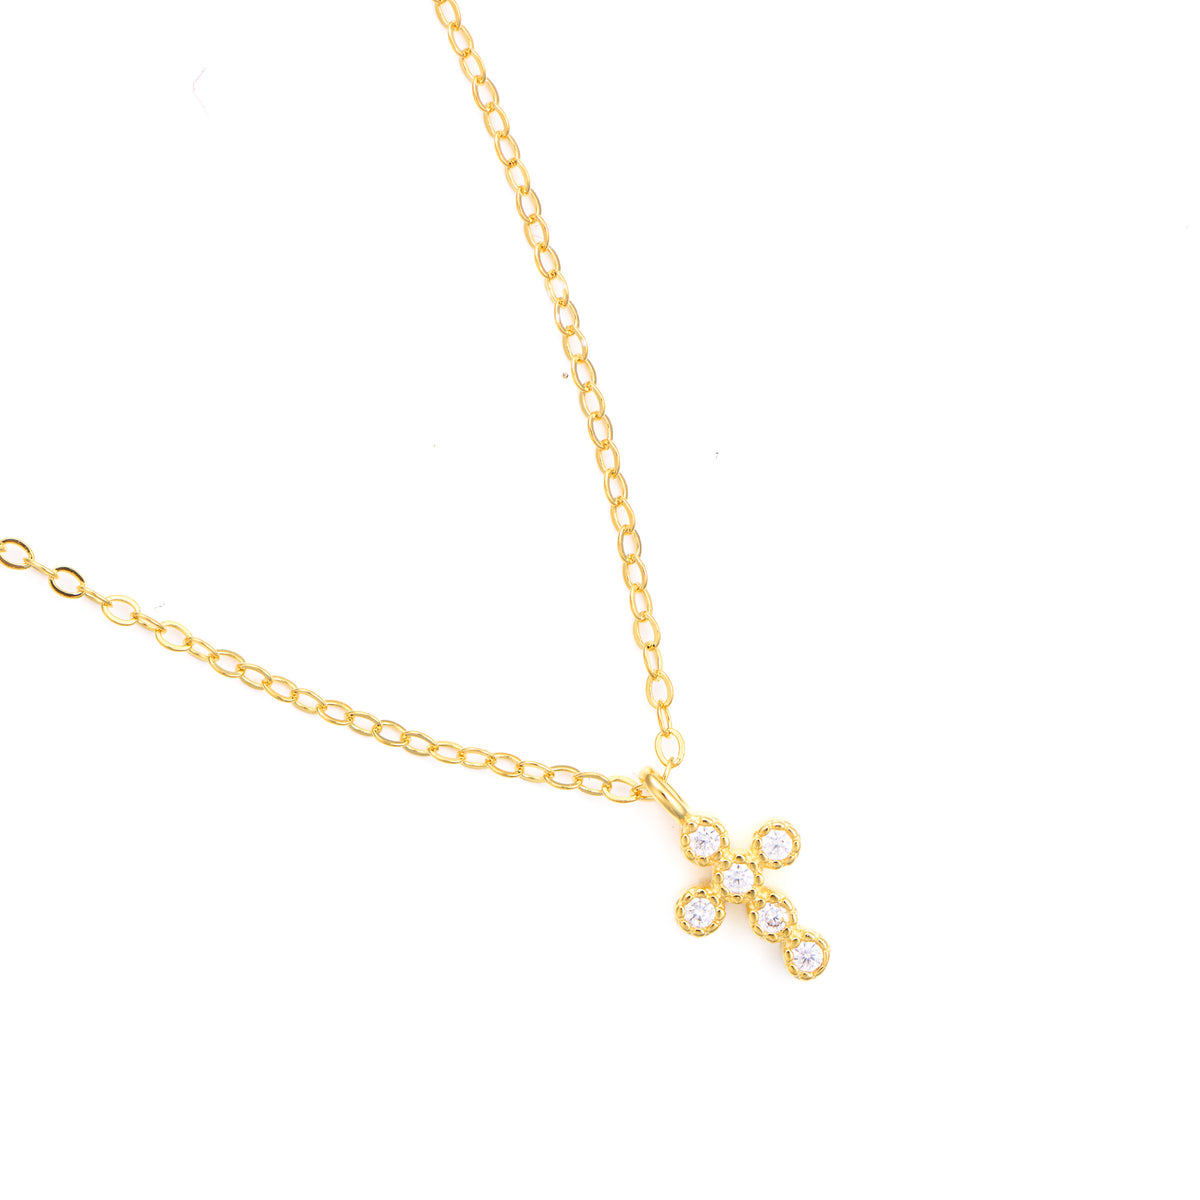 Petite Shine Cross silver necklace, gold plated